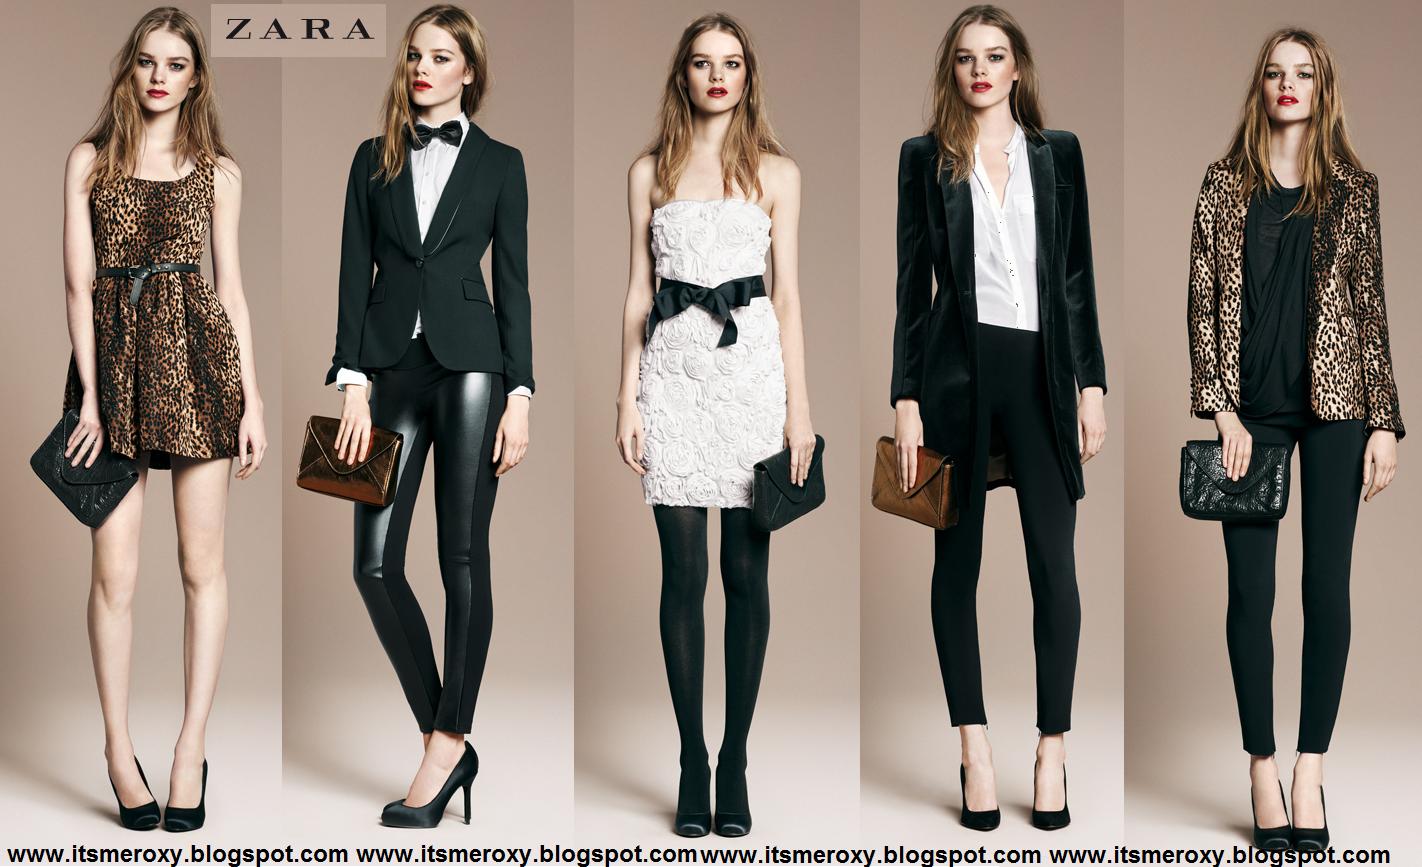 Zara is the true meaning of fashion